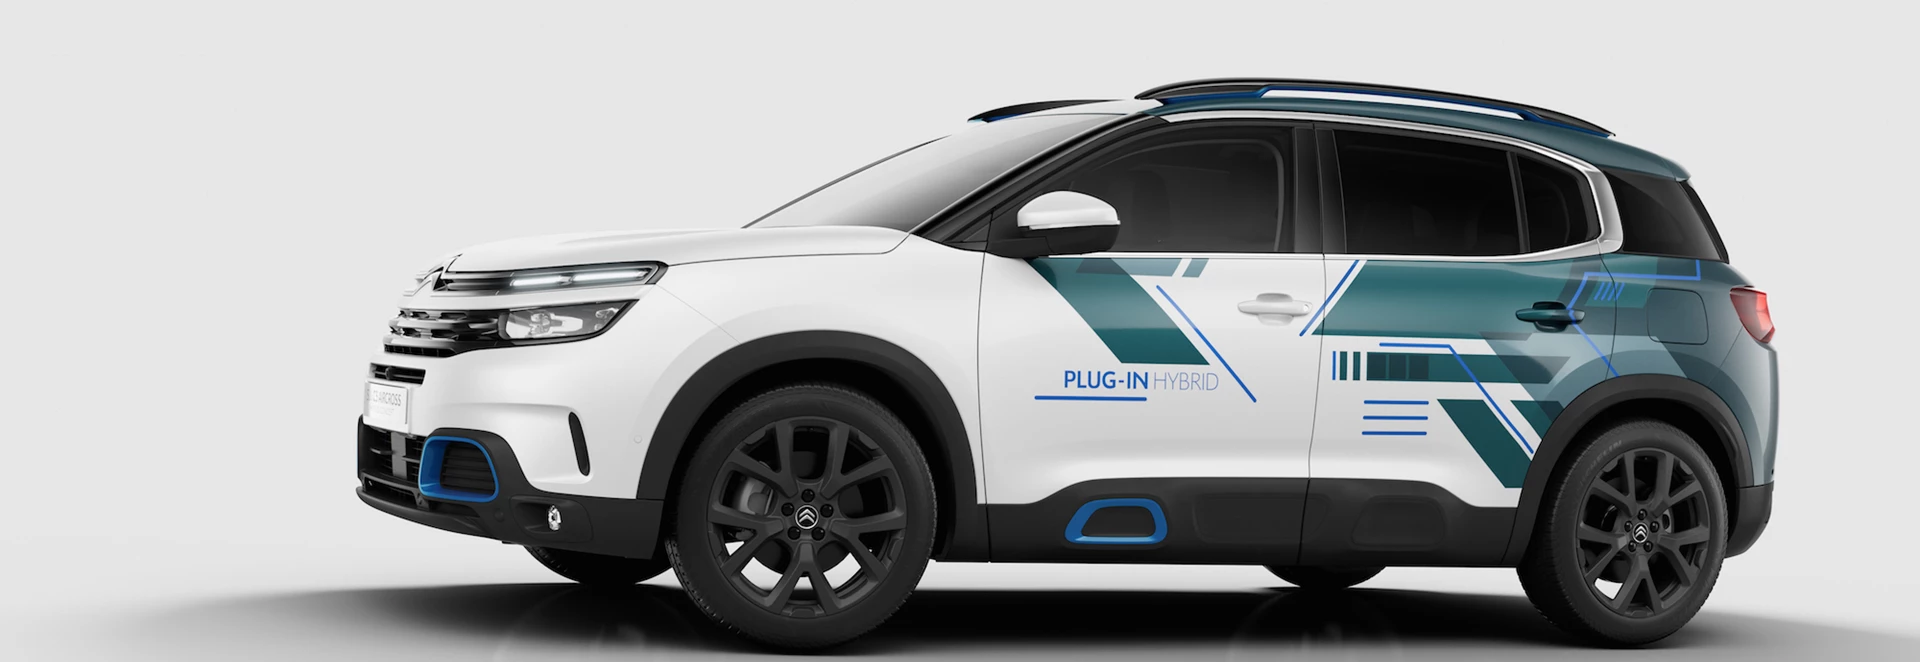 Citroen C5 Aircross is going hybrid in 2020: What you need to know